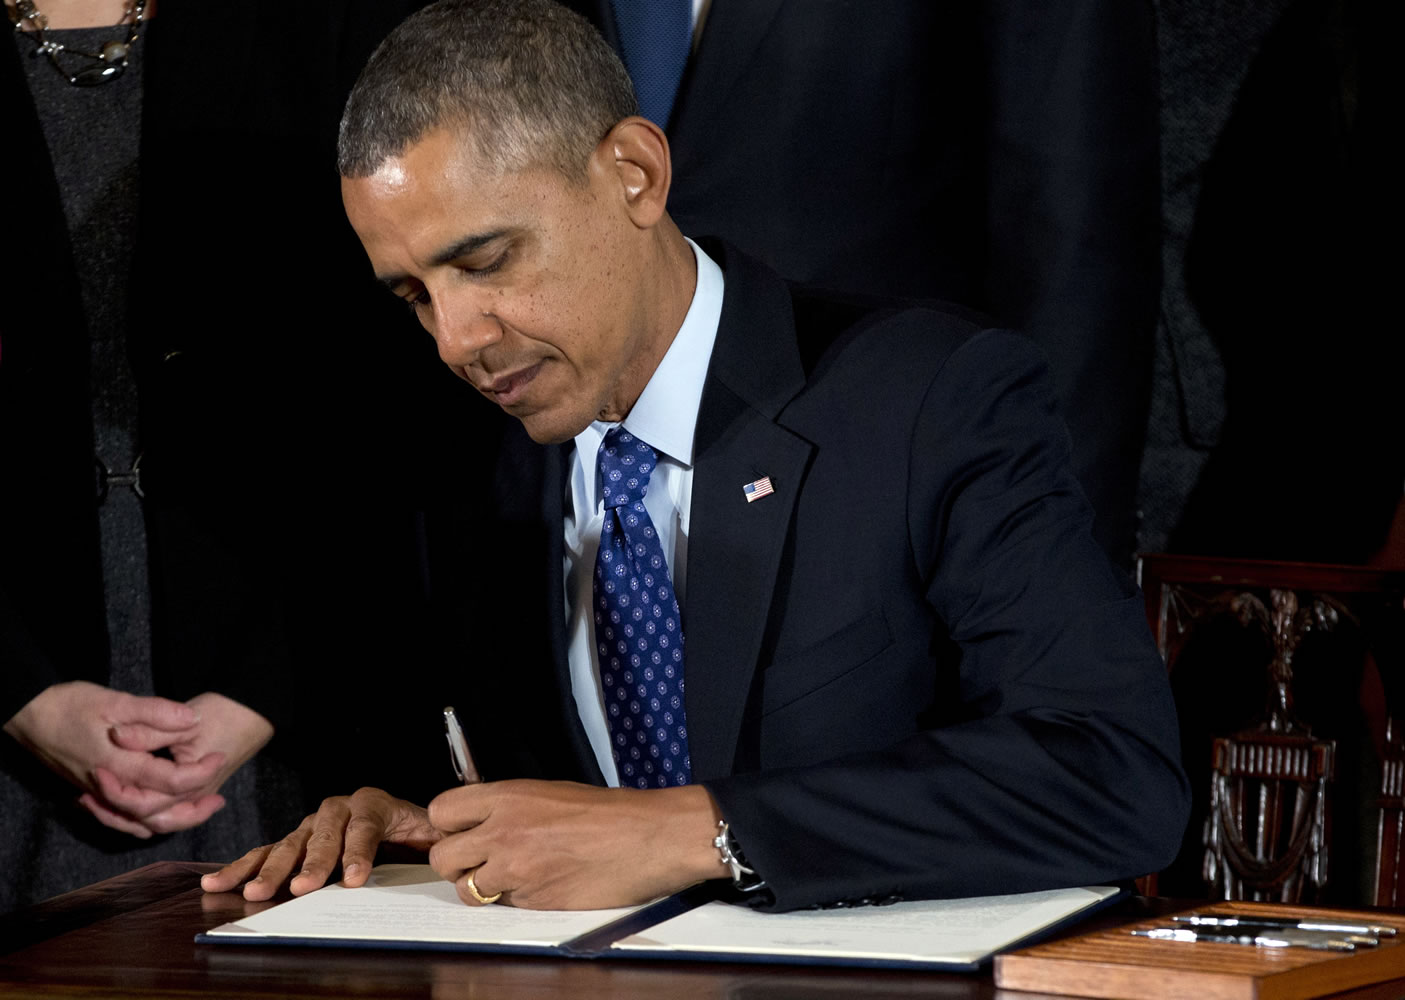 President Barack Obama signs a memorandum in january creating a task force to respond to campus rapes during an event for the Council on Women and Girls in the East Room of the White House in Washington.